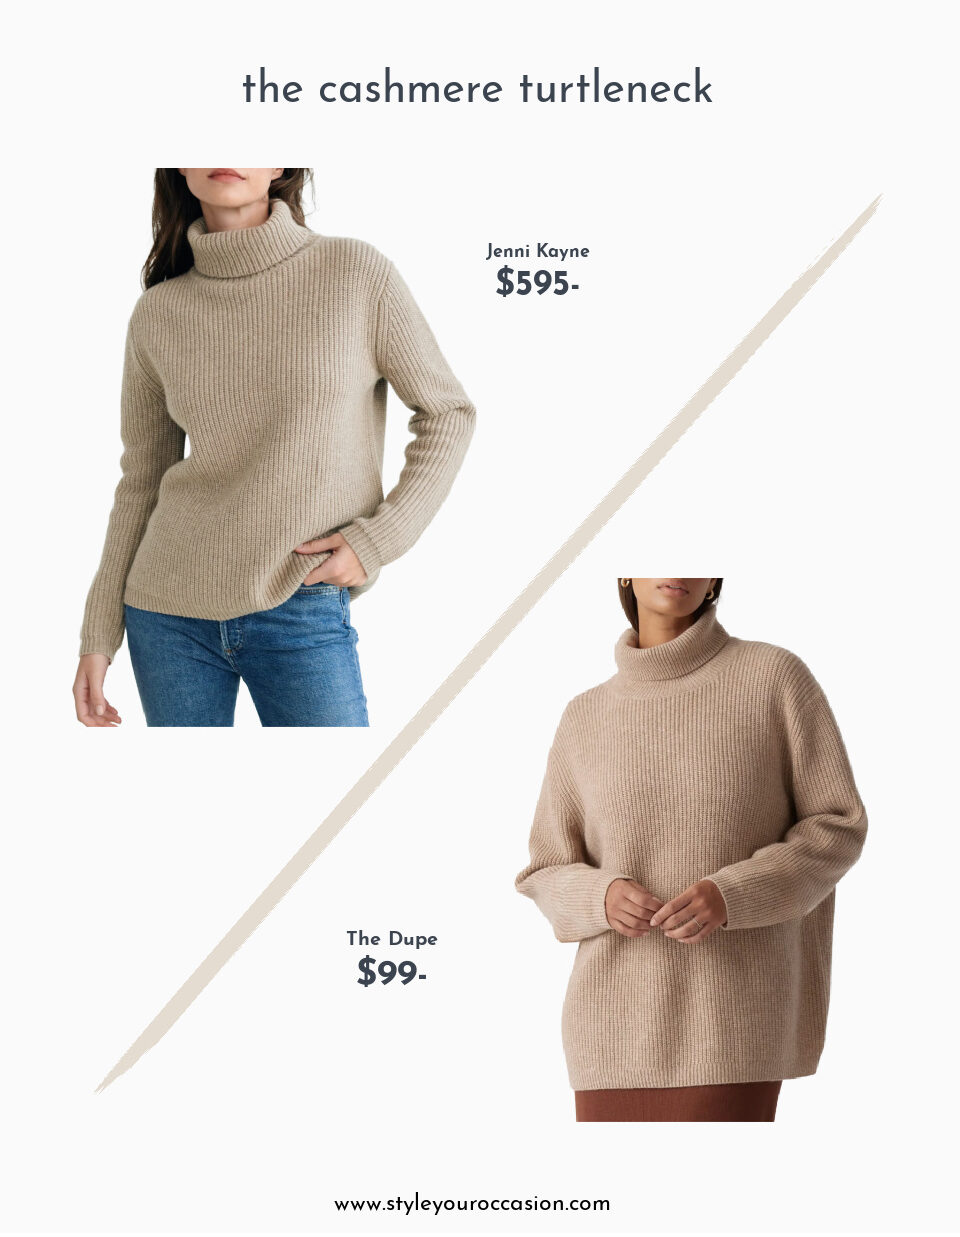 image comparing the Jenni Kayne cashmere turtleneck sweater to a look-alike dupe sweater from Quince